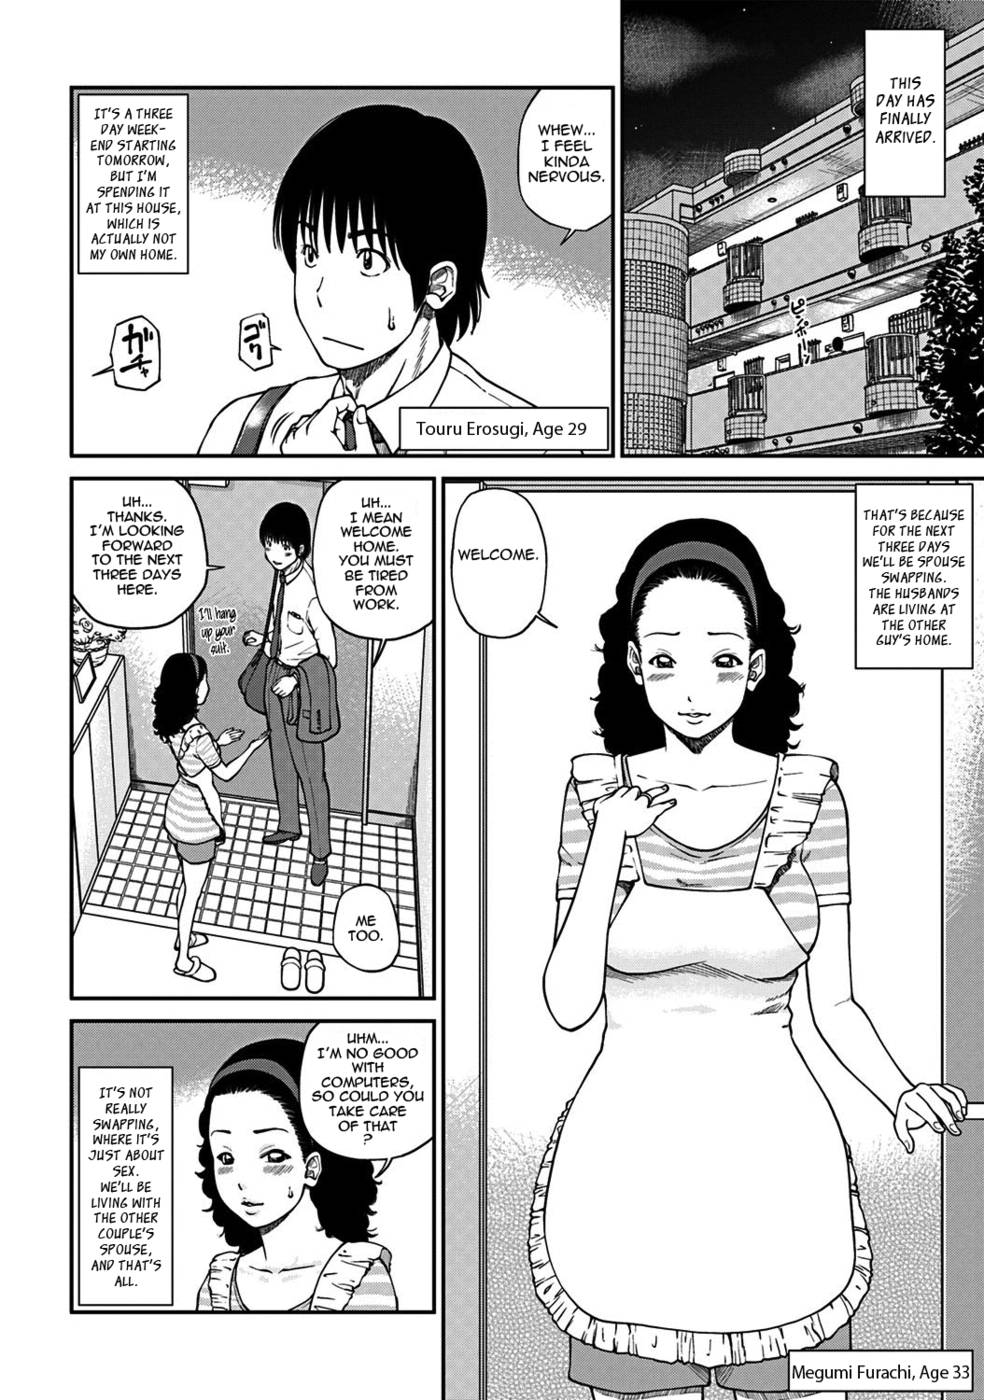 33 Year Old Unsatisfied Wife-Chapter 2-Spouse Swapping-First Night-Hentai Manga Hentai Comic - Page 2 picture